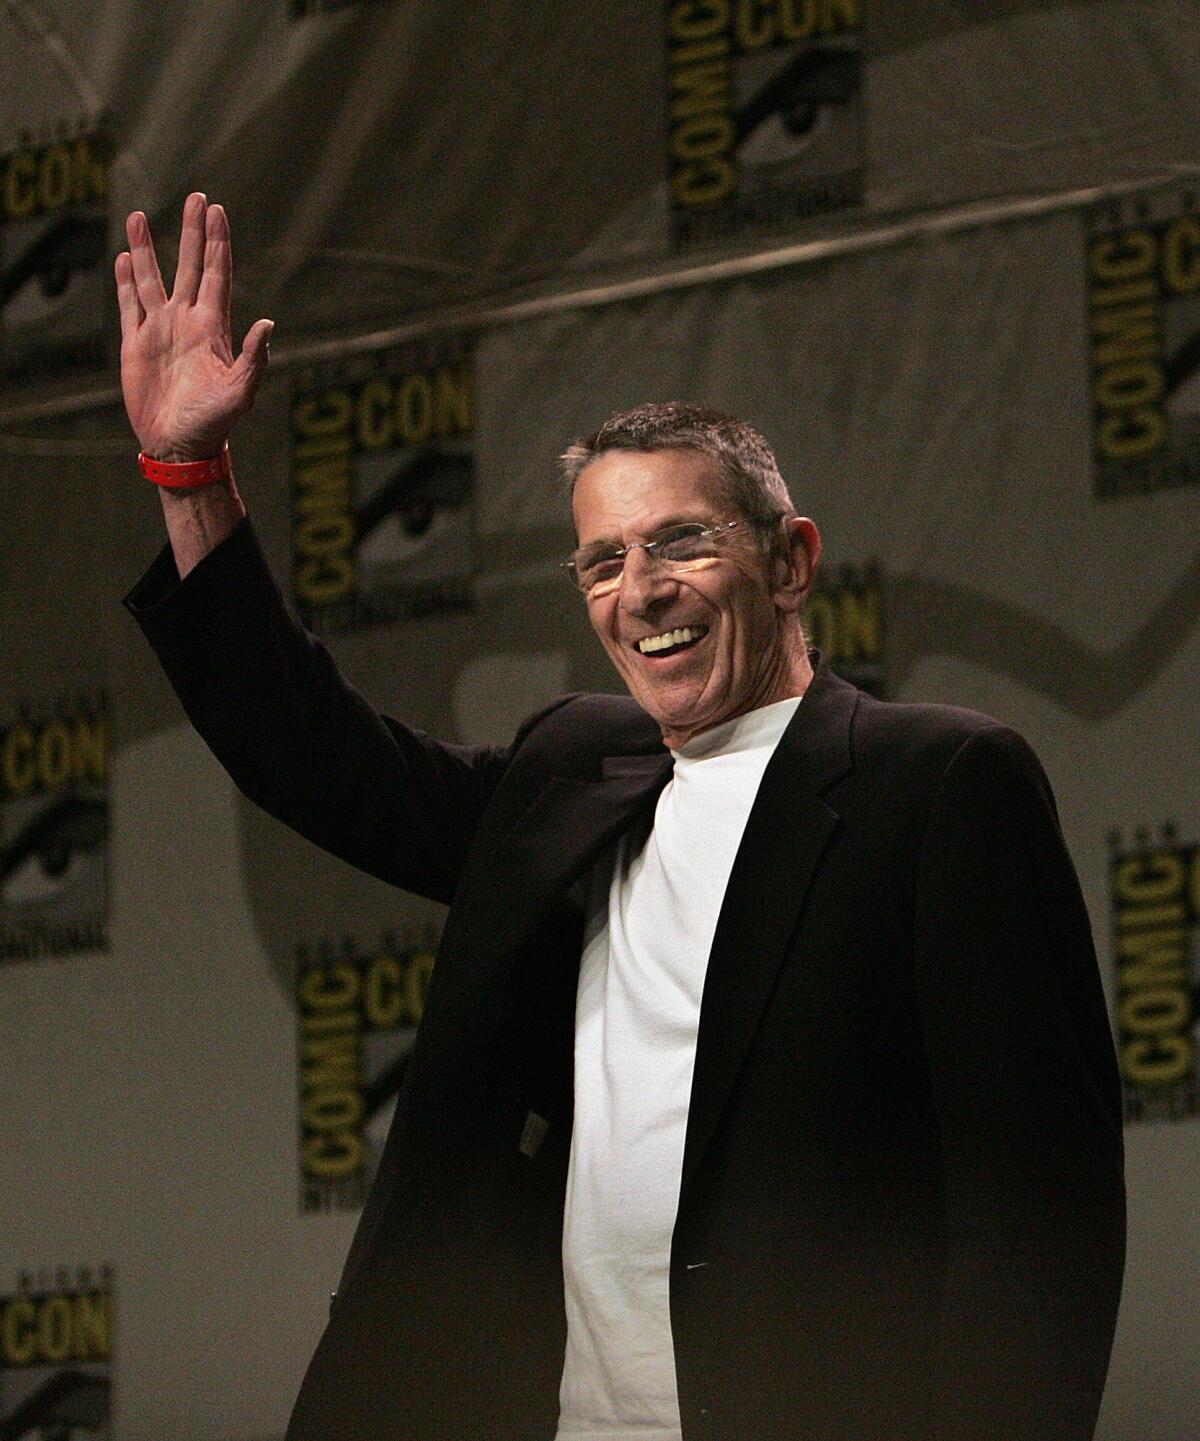 Leonard Nimoy arrives on-stage during the Paramount Pictures panel on the new "Star Trek" film at Comic-Con Thursday, July 26, 2007.